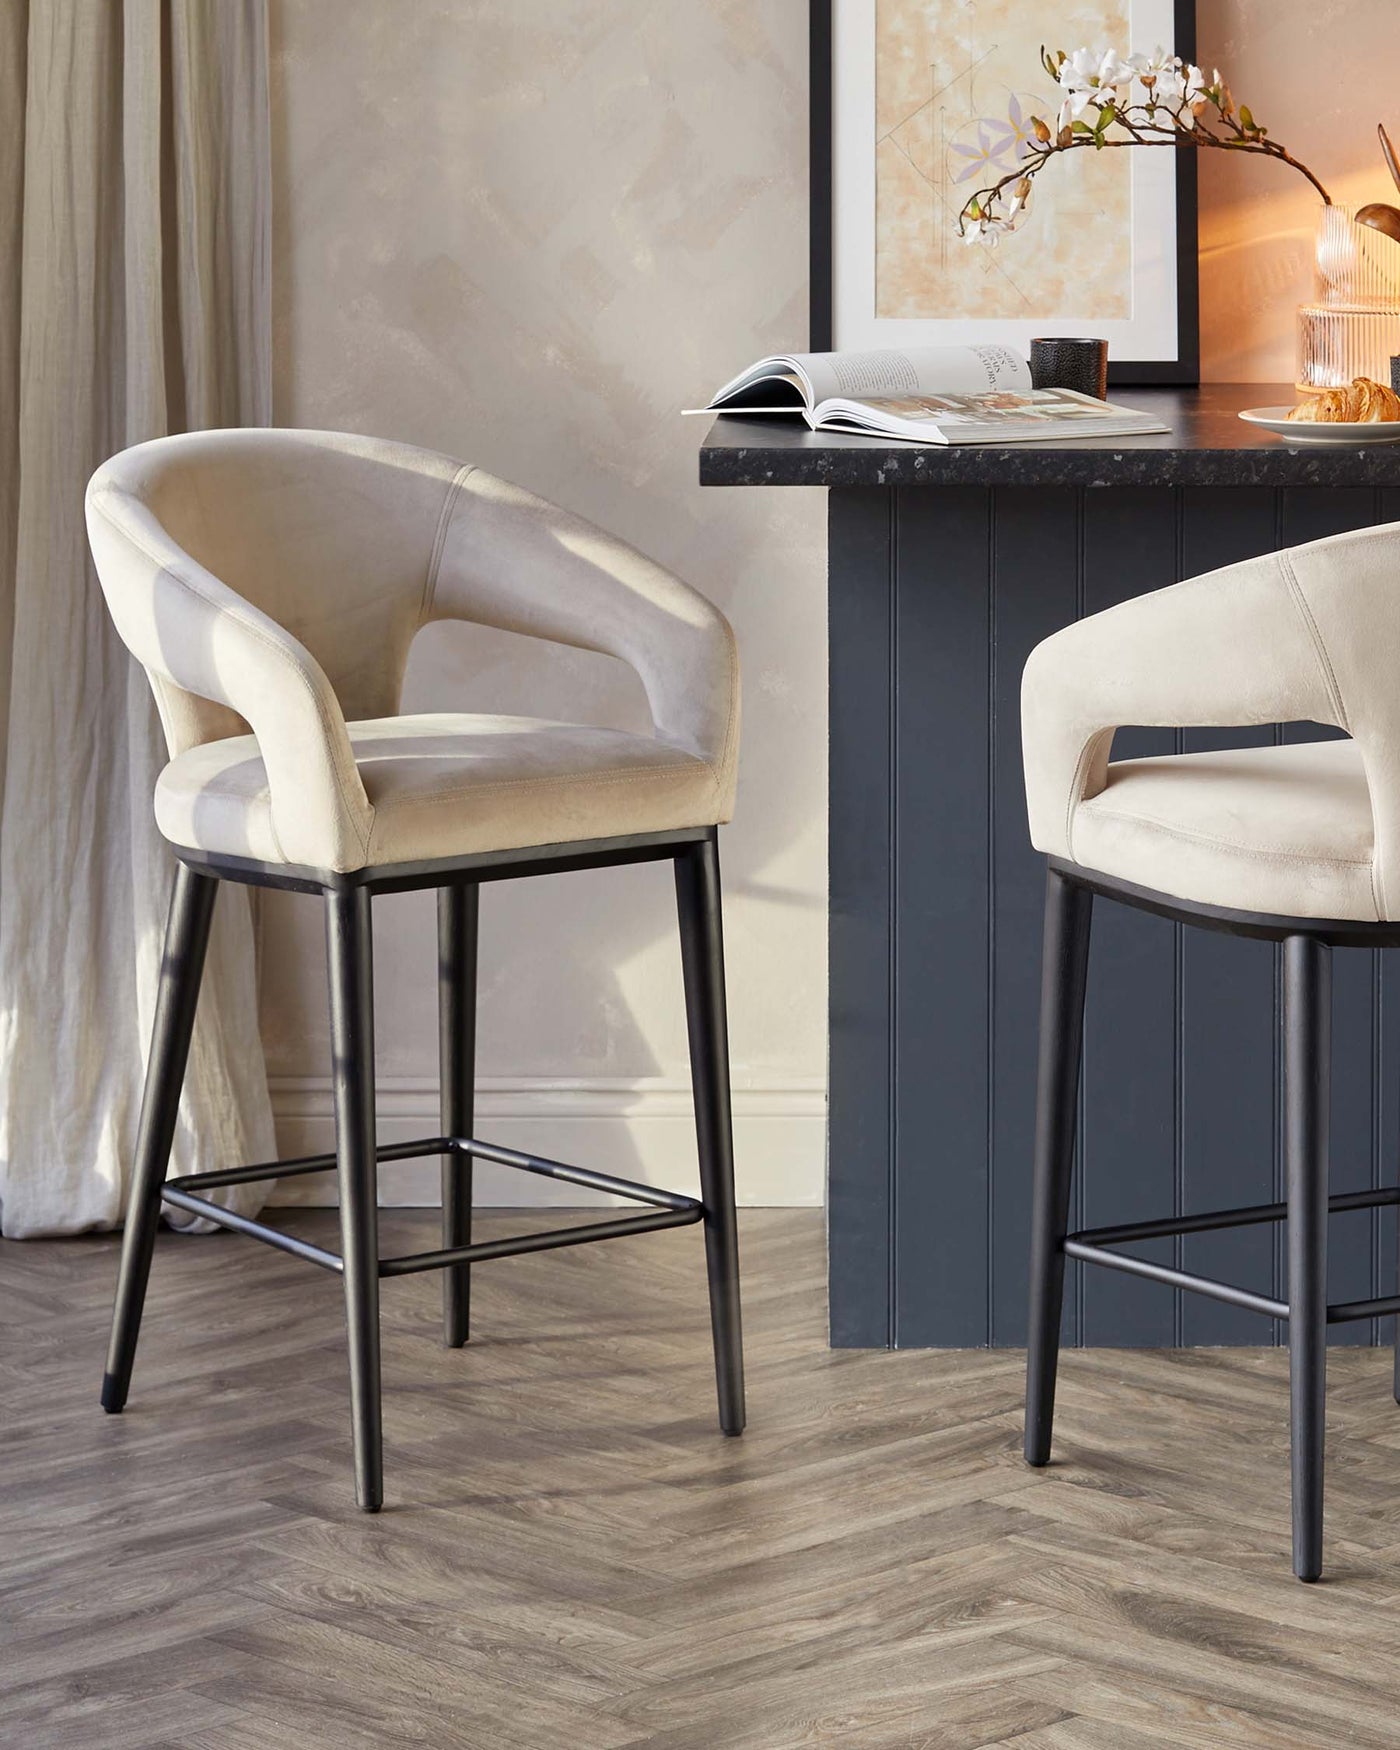 Elegant contemporary bar stools with plush beige velvet upholstery and a curved backrest, featuring sleek black metal legs with a geometric footrest design.